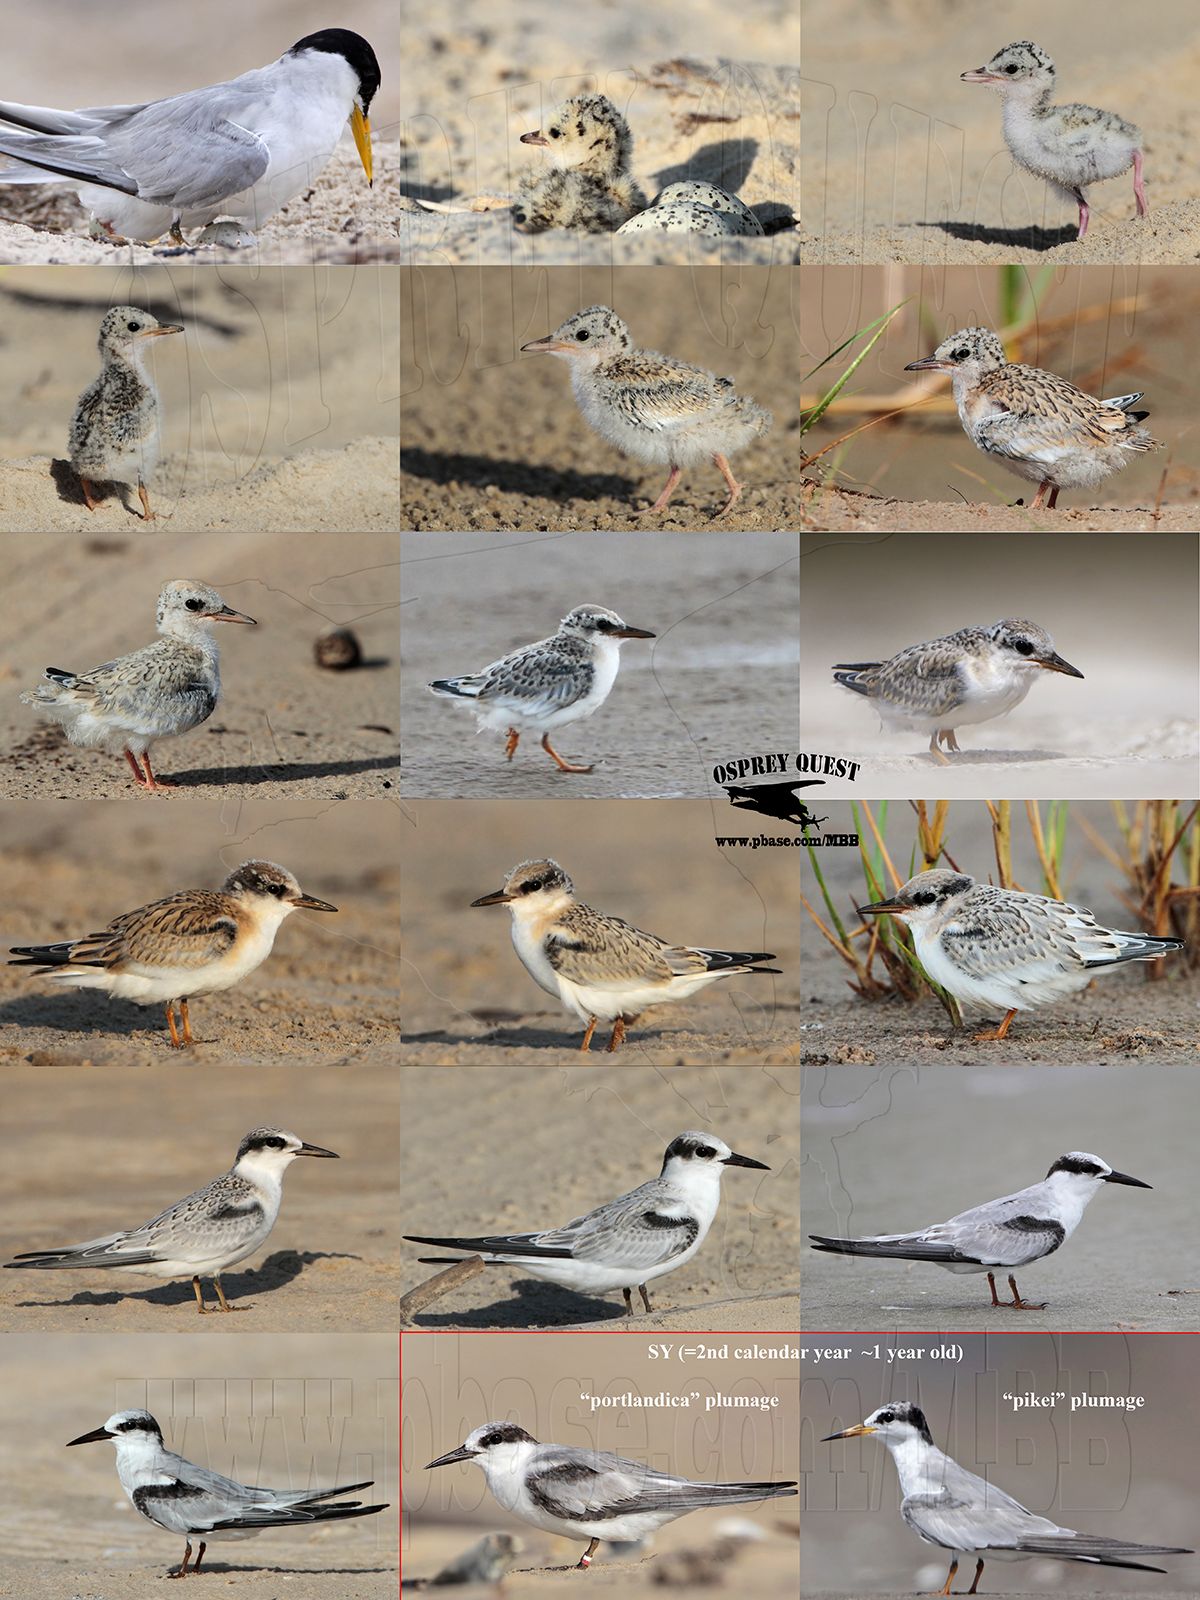 Least Tern - growth and plumages during first year of life.jpg